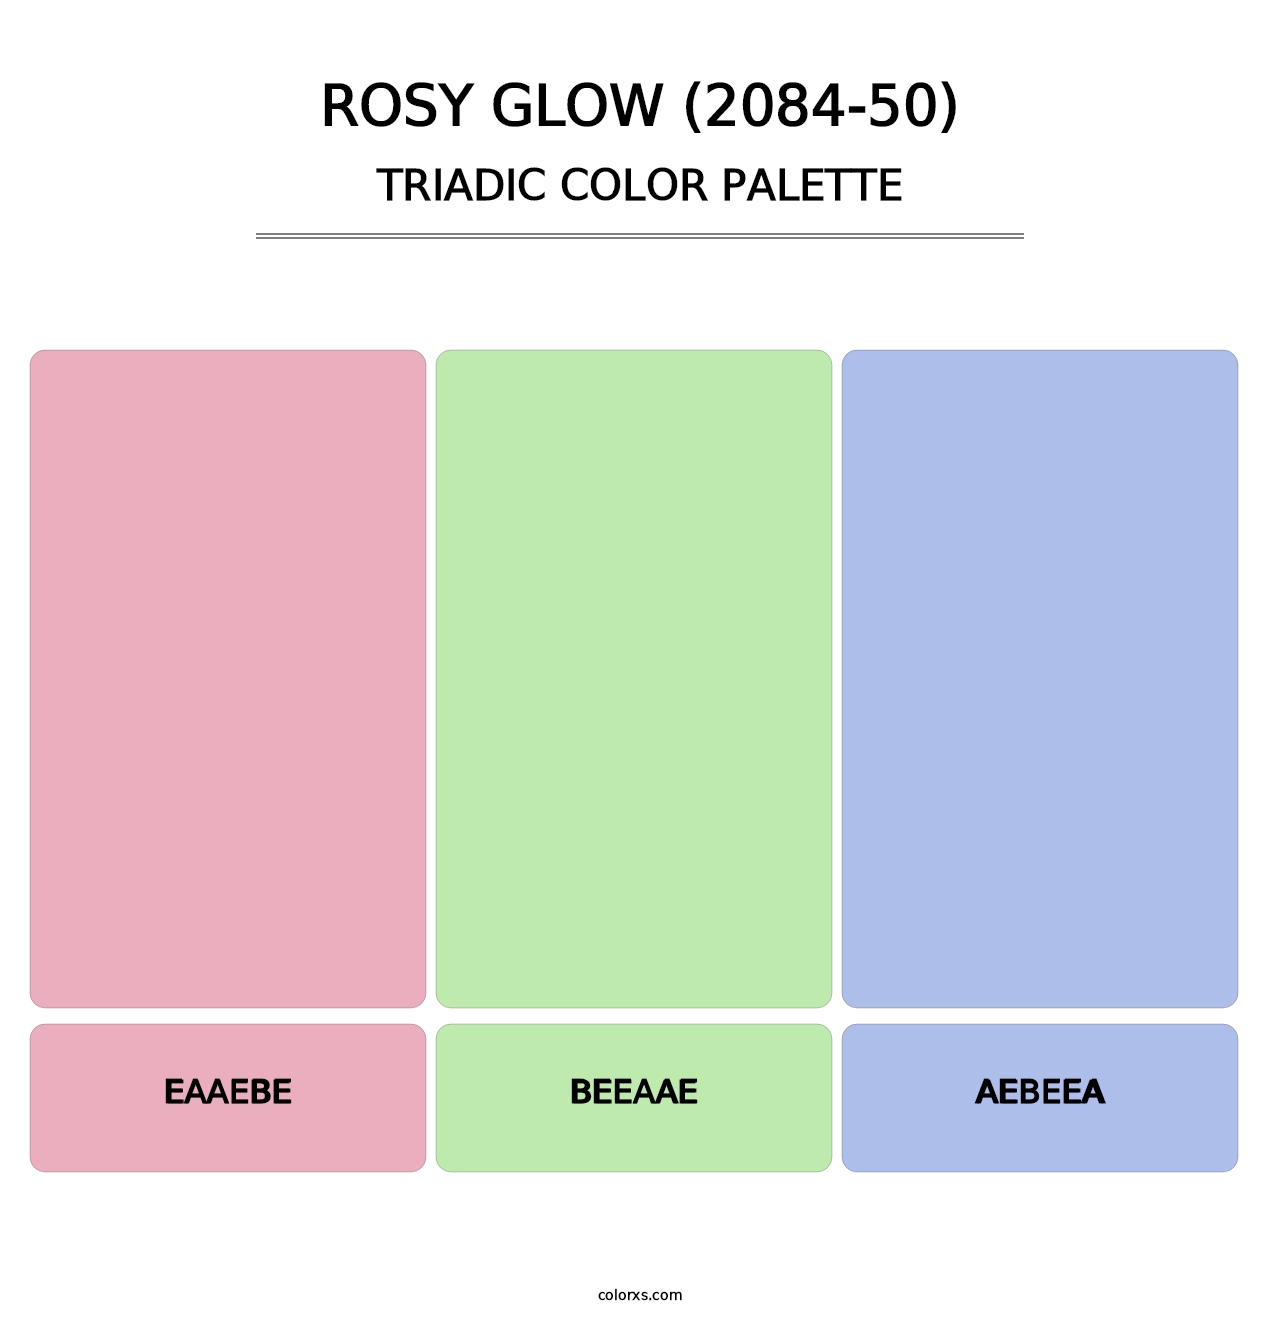 Rosy Glow (2084-50) - Triadic Color Palette